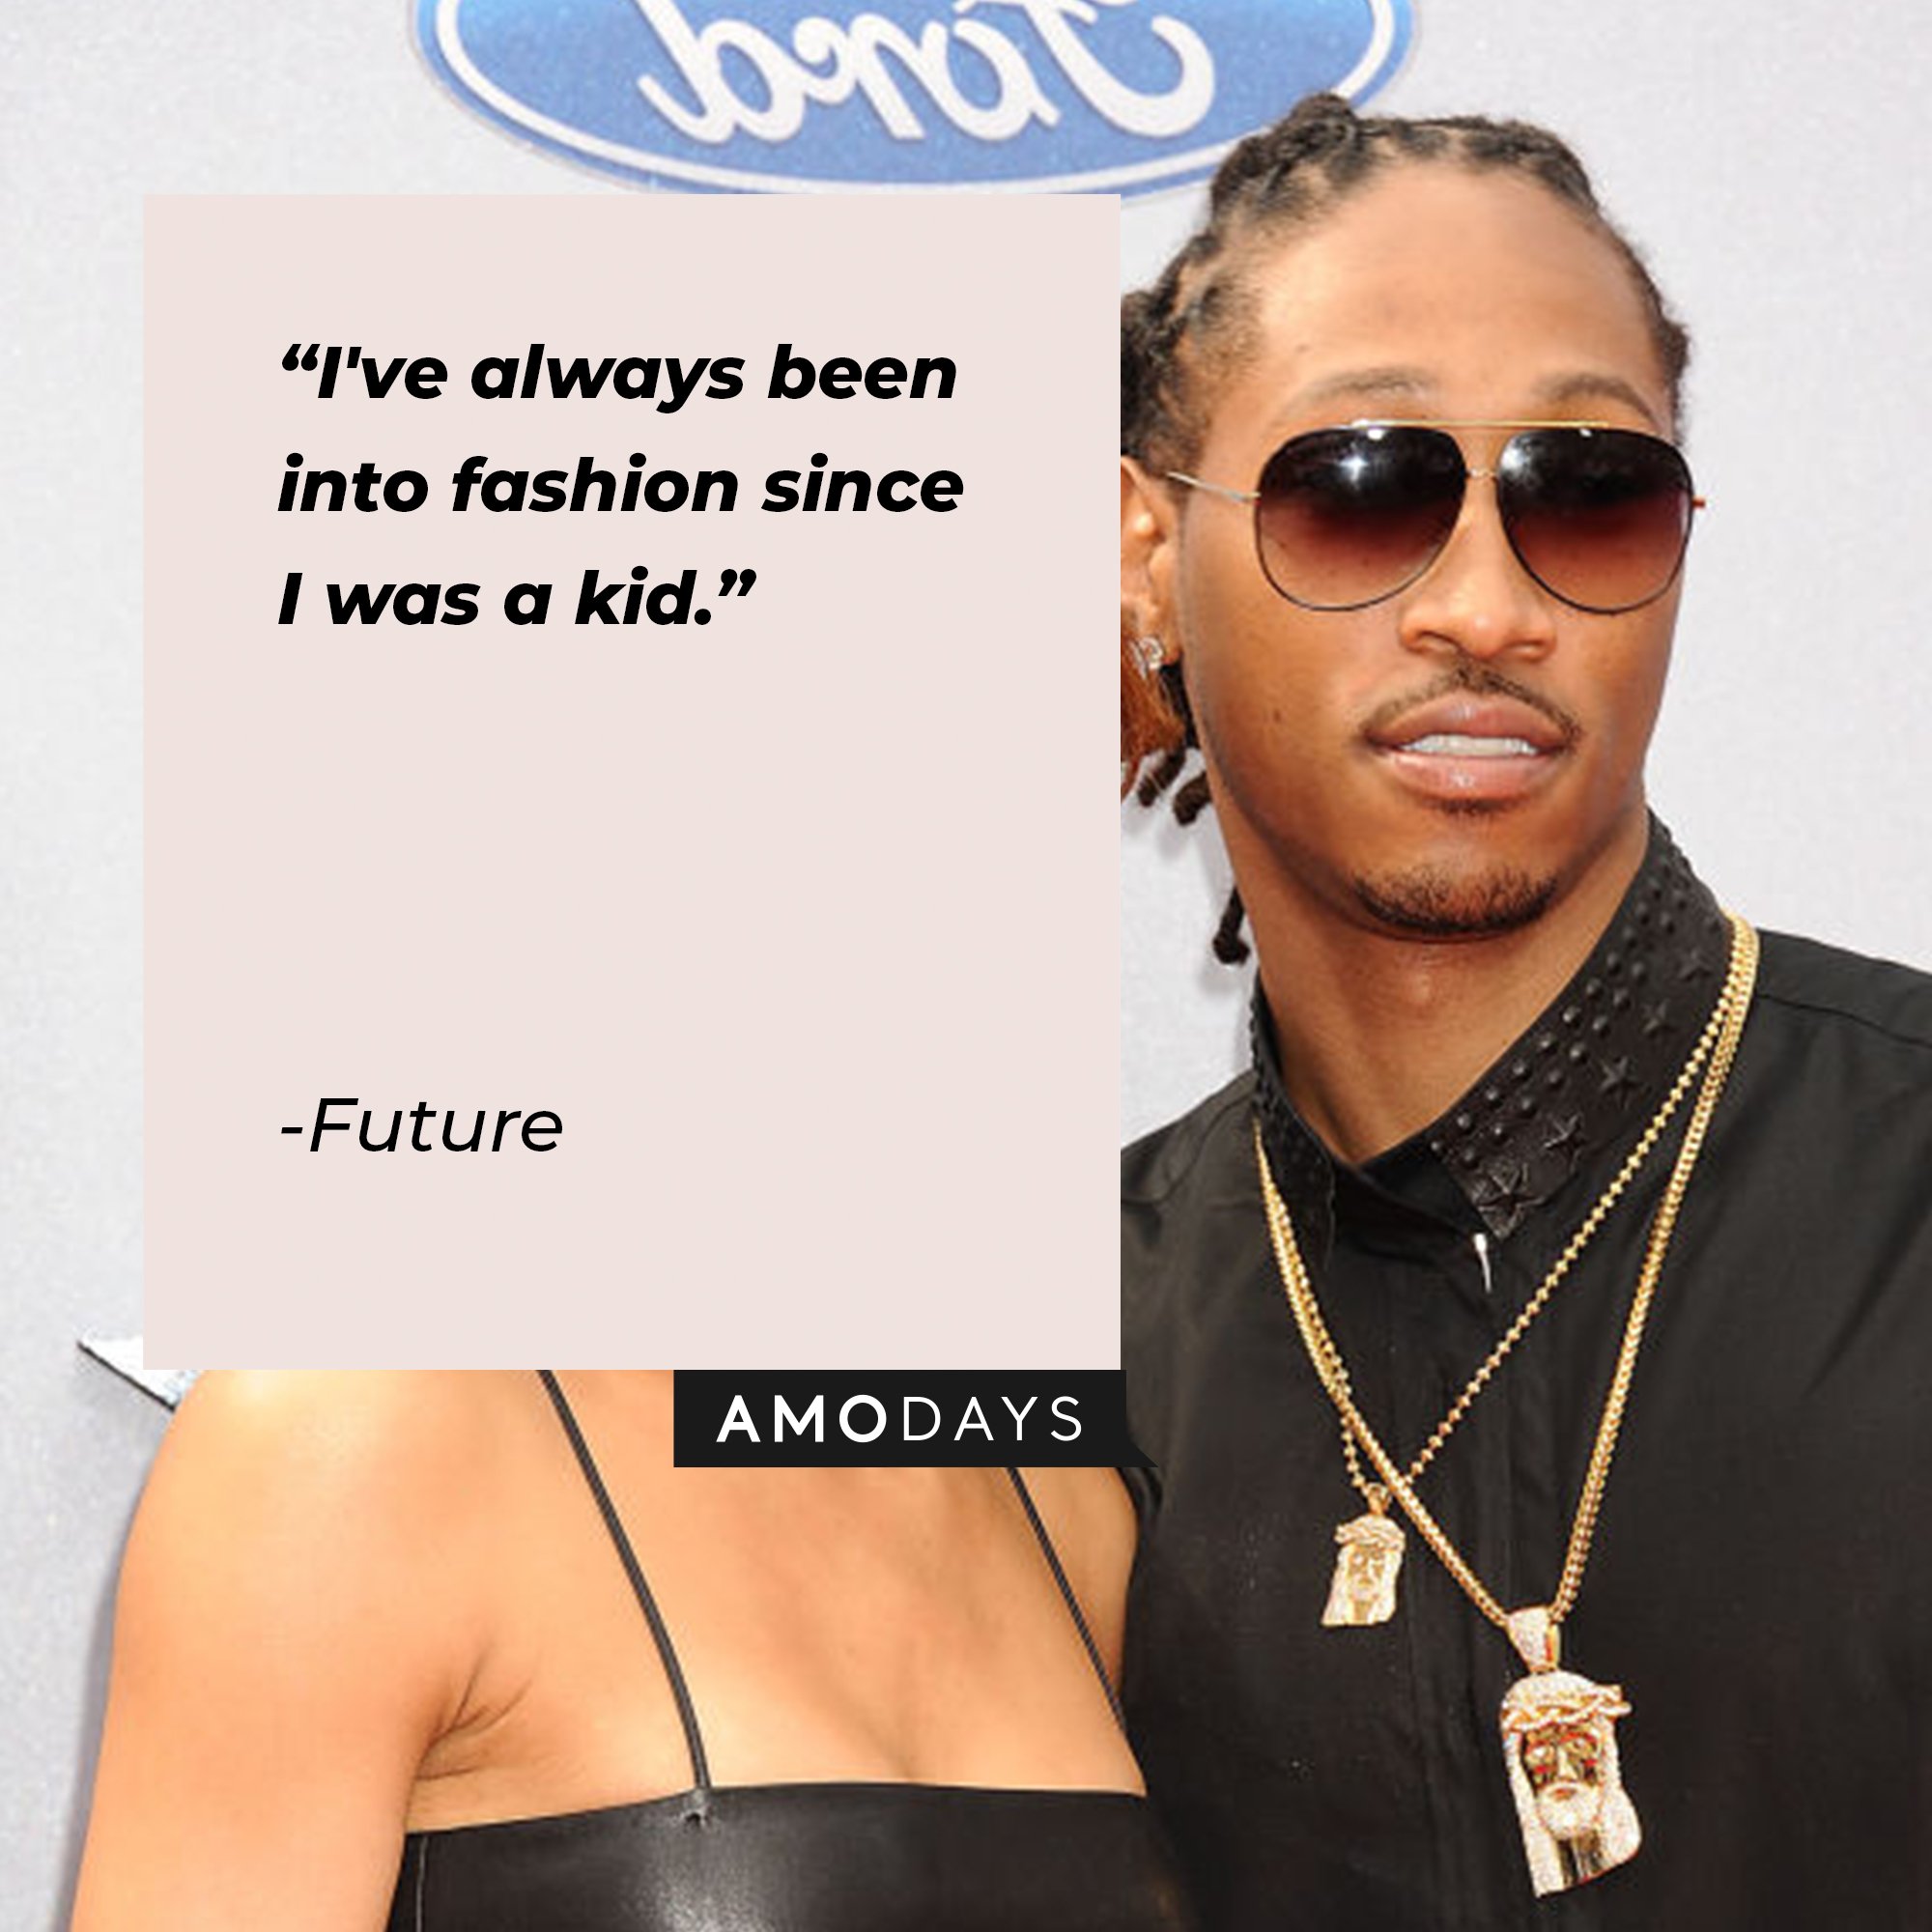 Future’s quote: "I've always been into fashion since I was a kid.” | Image: AmoDays 